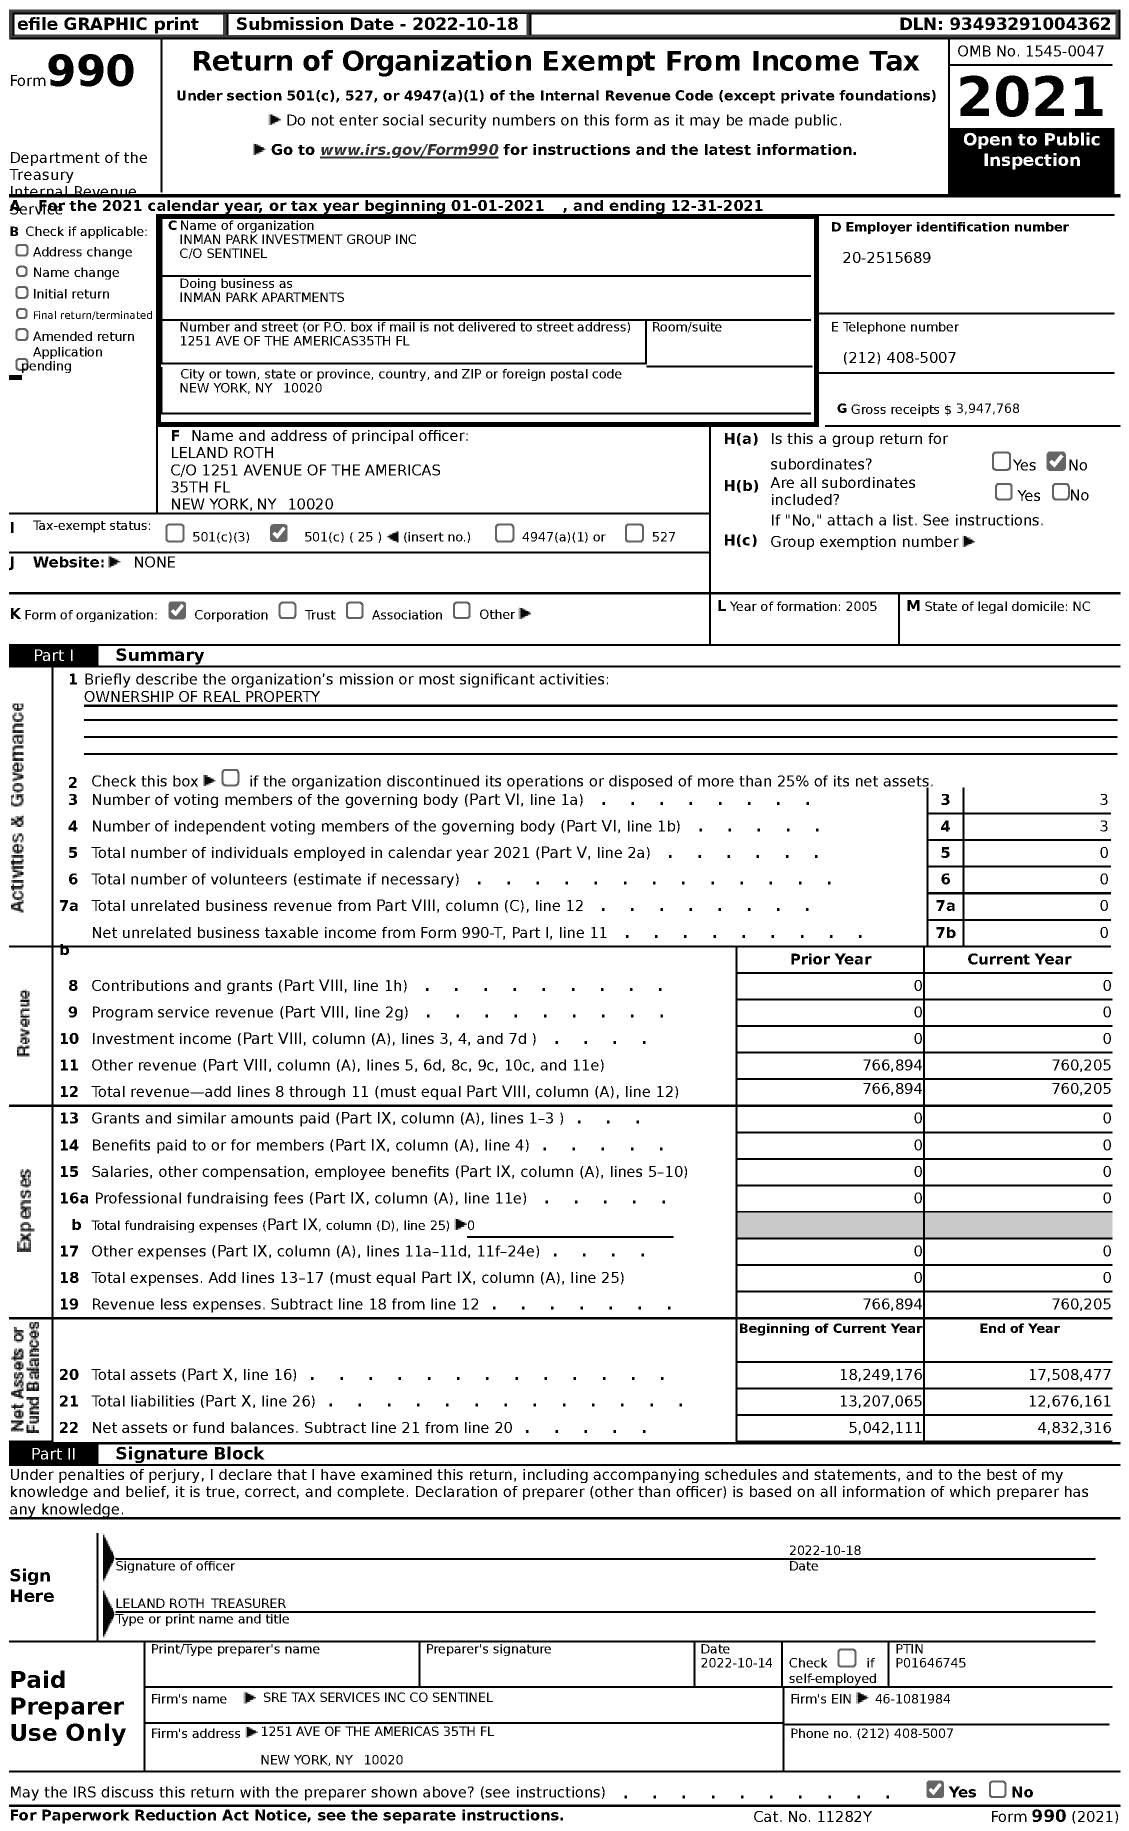 Image of first page of 2021 Form 990 for Inman Park Apartments